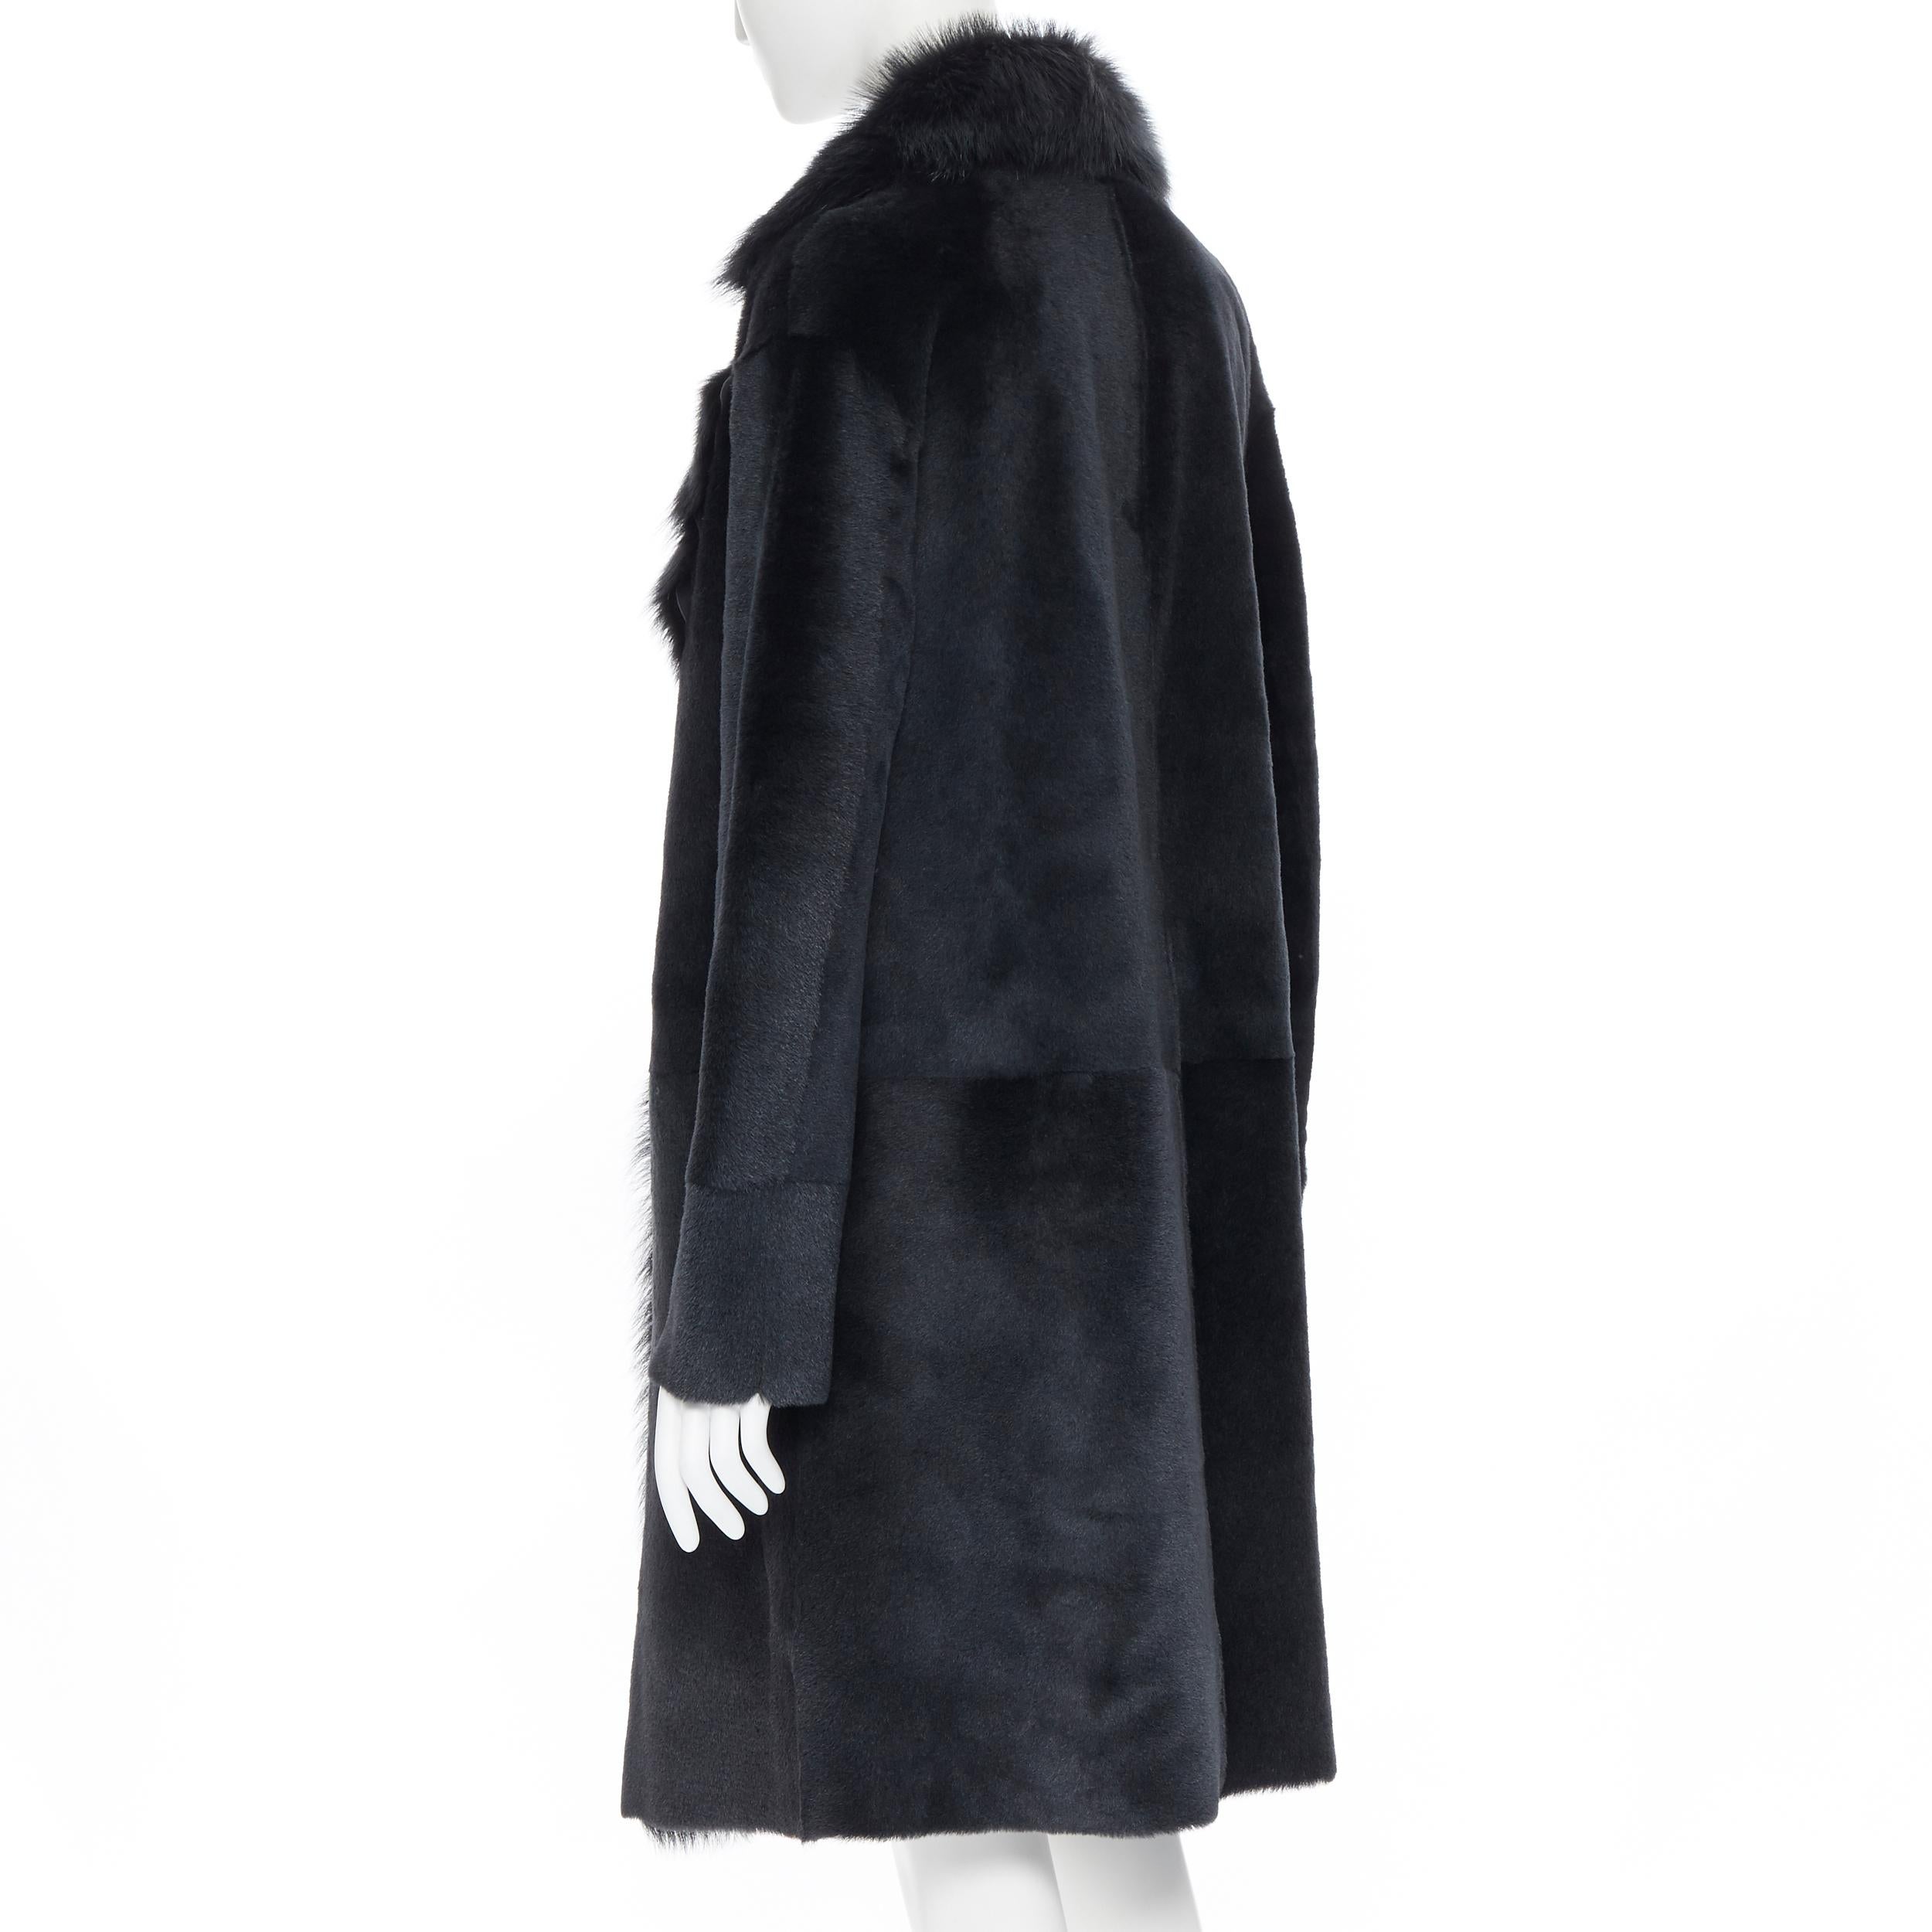 THEORY black dyed shearling lamb genuine fur leather oversized winter coat XS 1